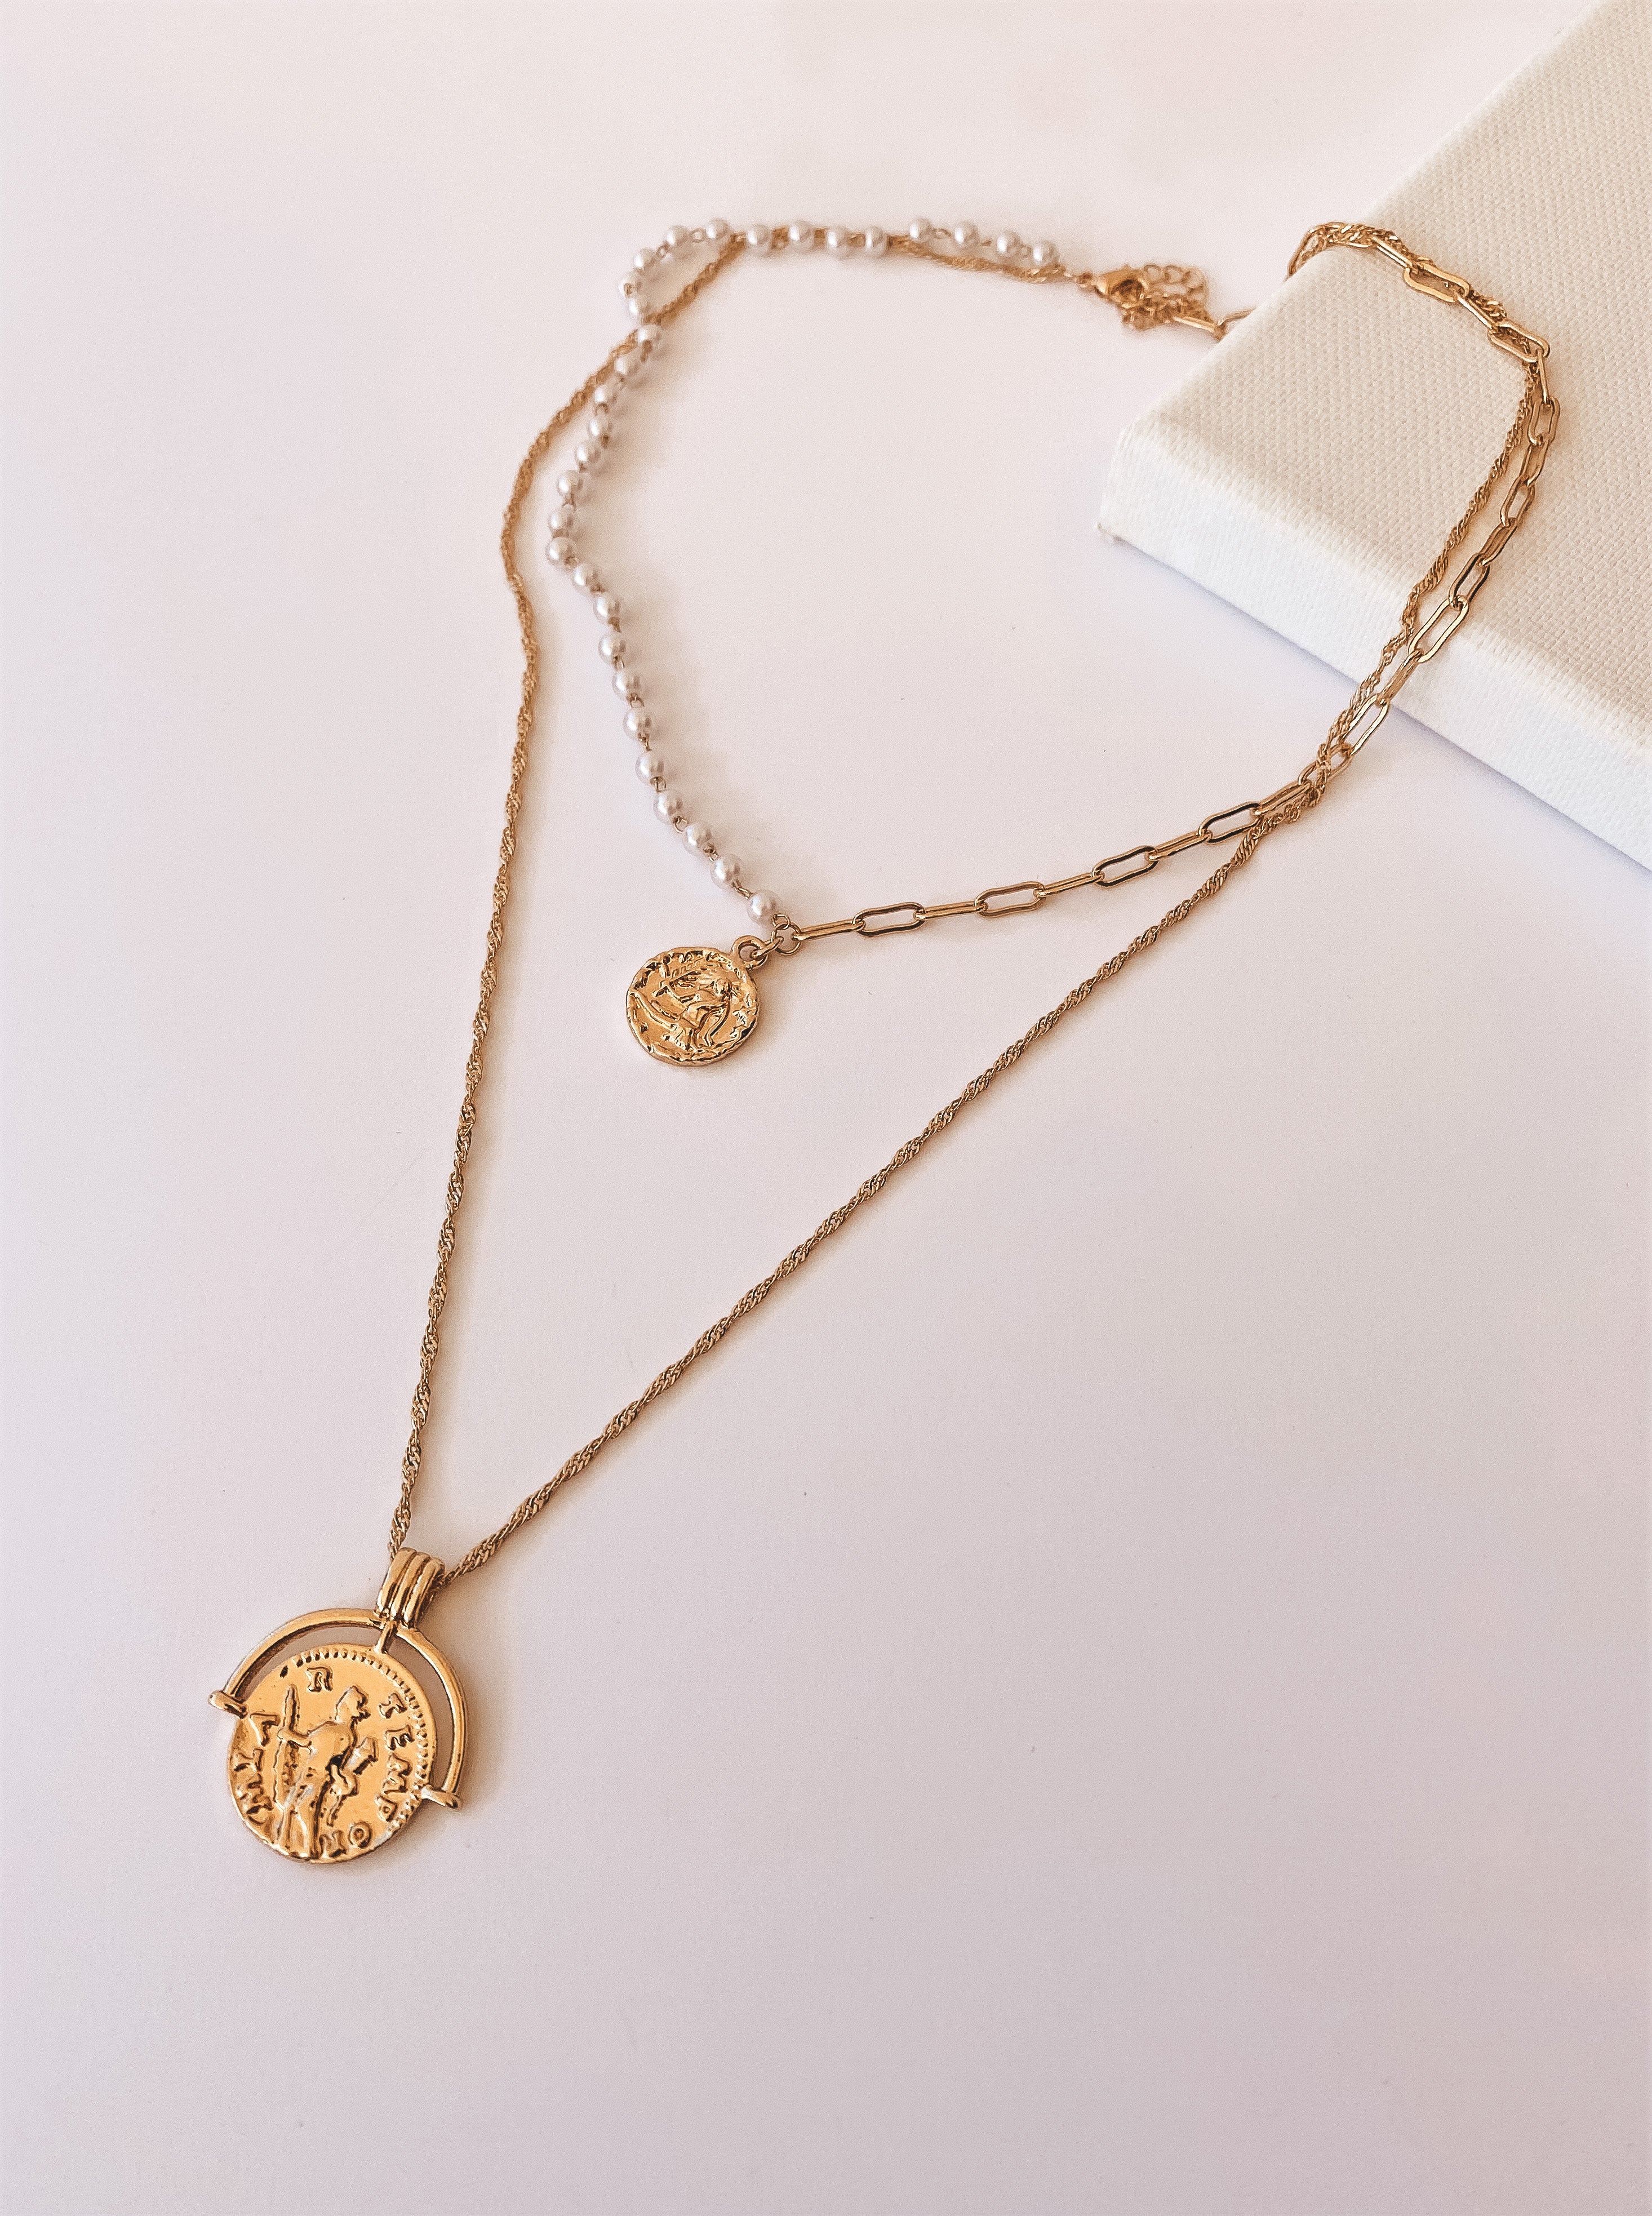 THE ATLAS COIN AND PEARL NECKLACE SET